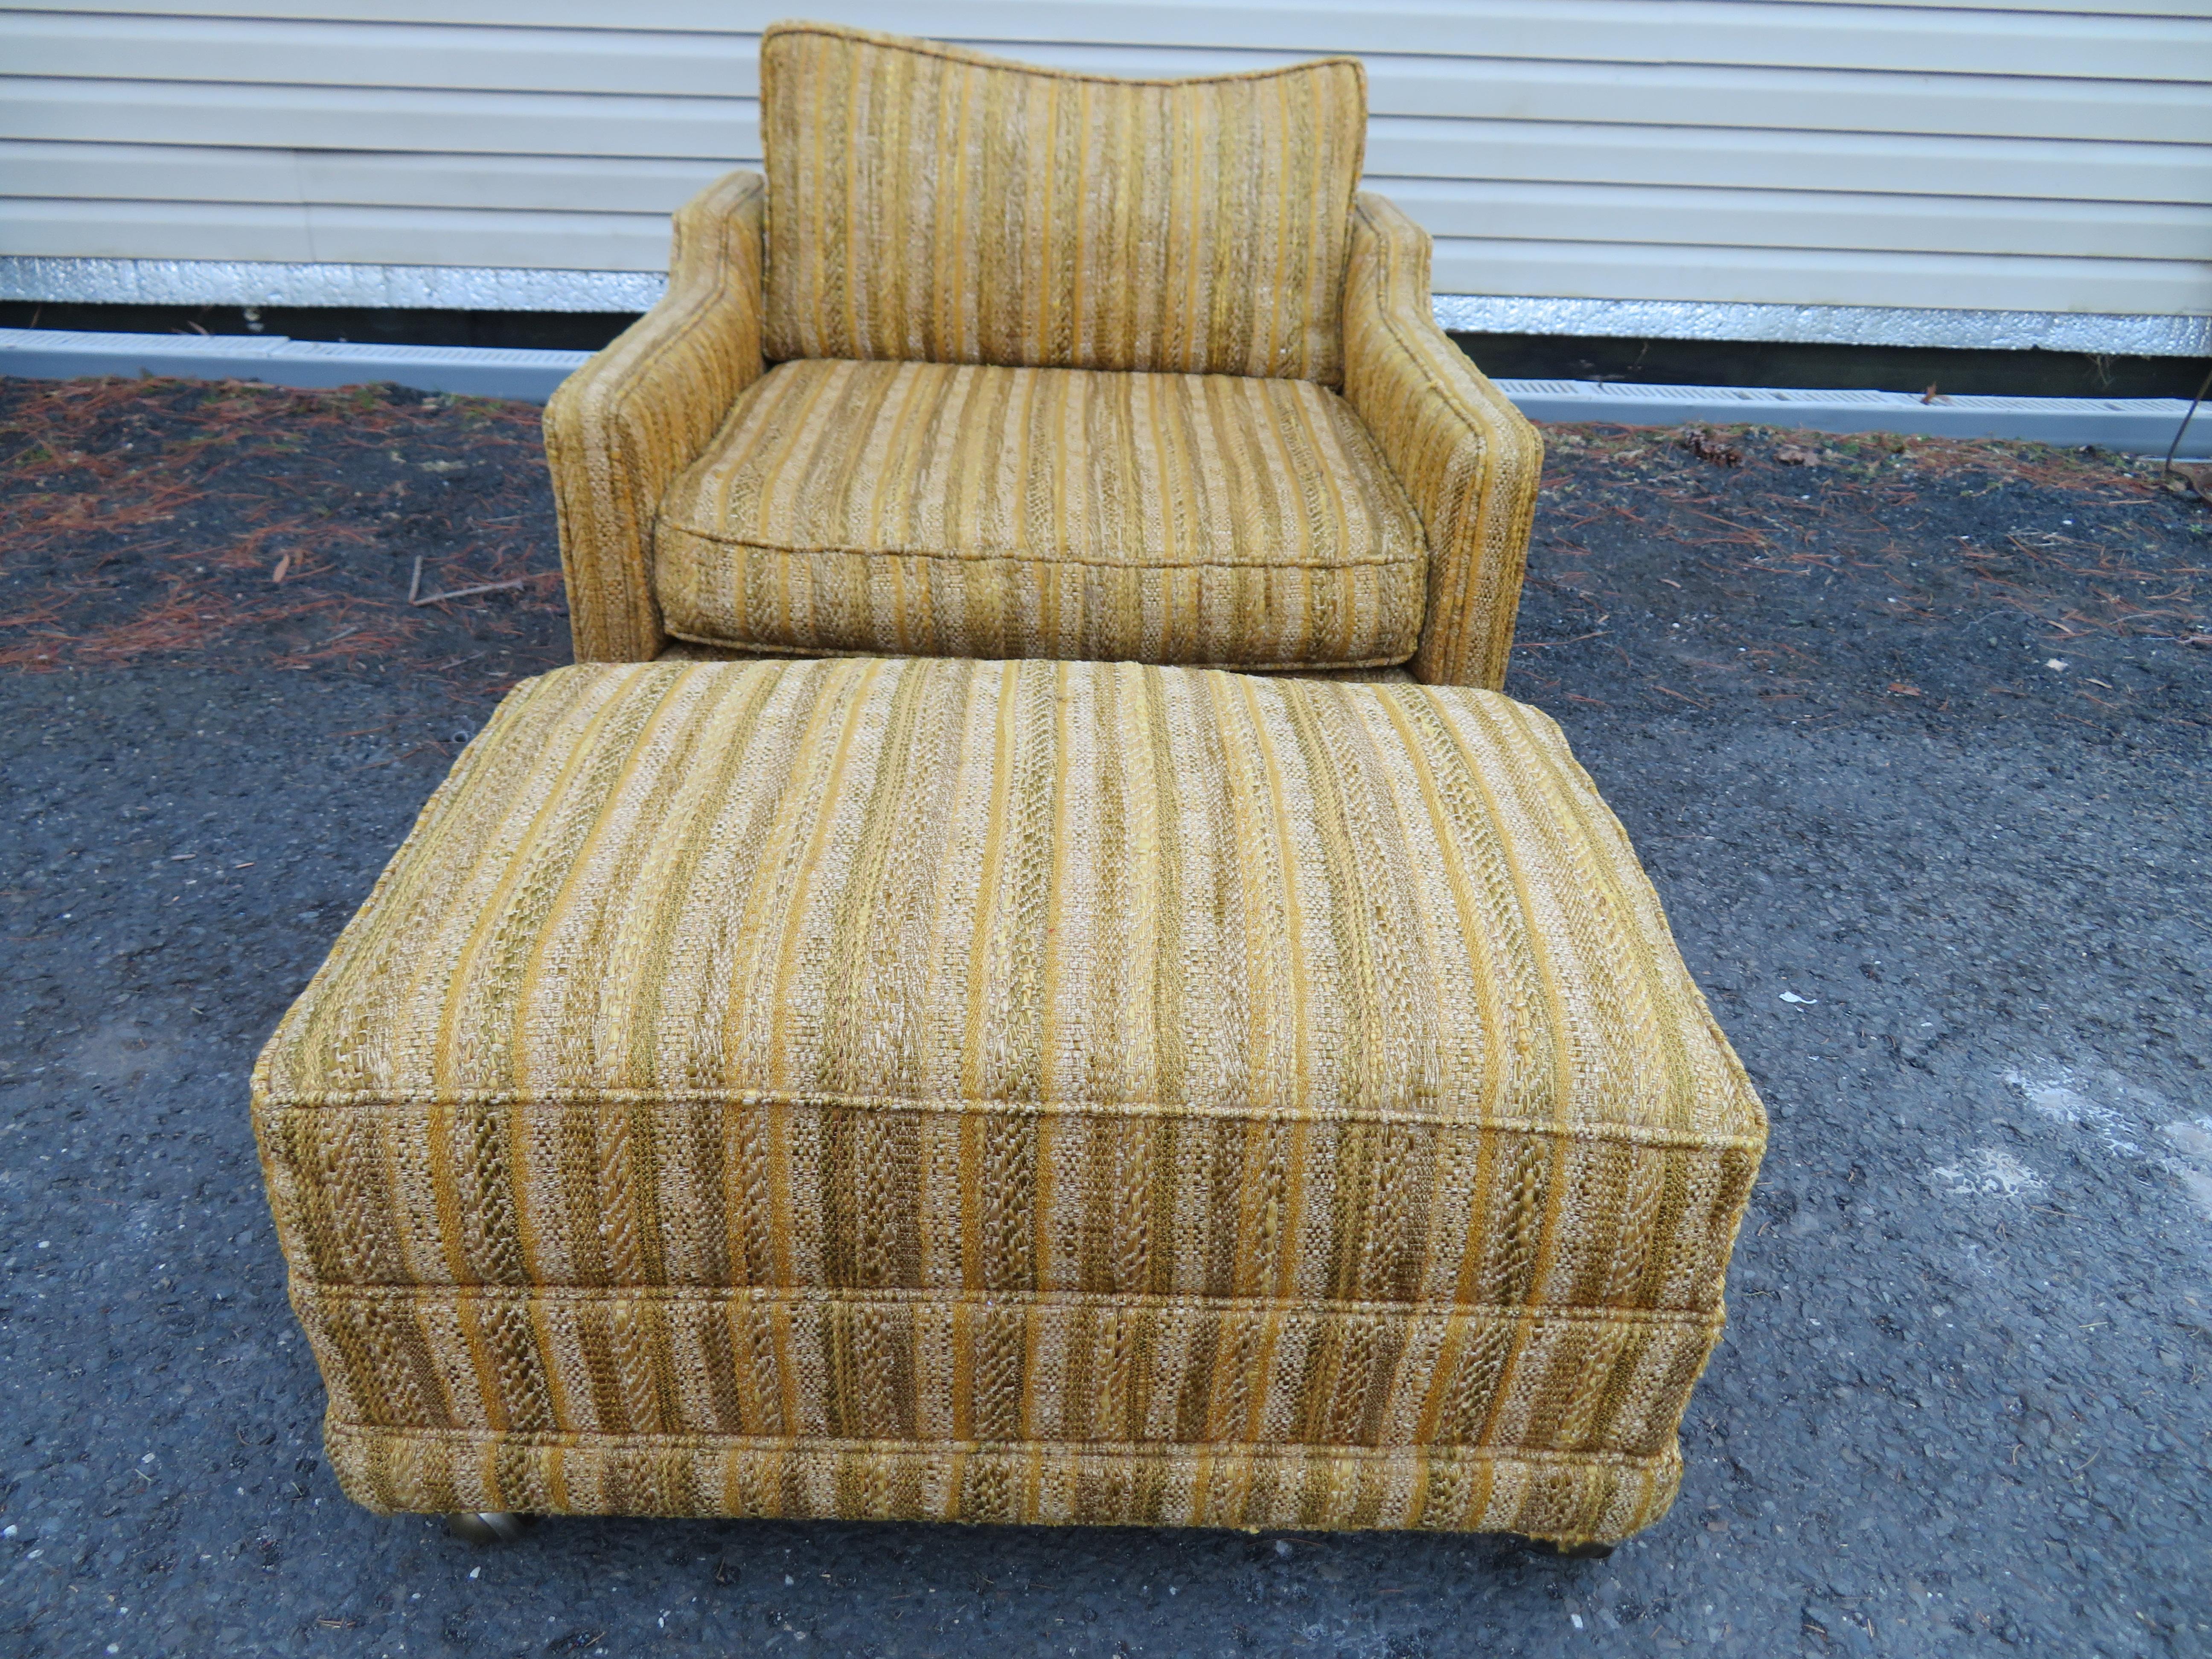 Stylish John Widdicomb rolling lounge chair and ottoman. This chair is beyond comfortable with a down-filled back cushion and original matching ottoman. Both the chair and ottoman have casters making this set easy to move around. The chair measures